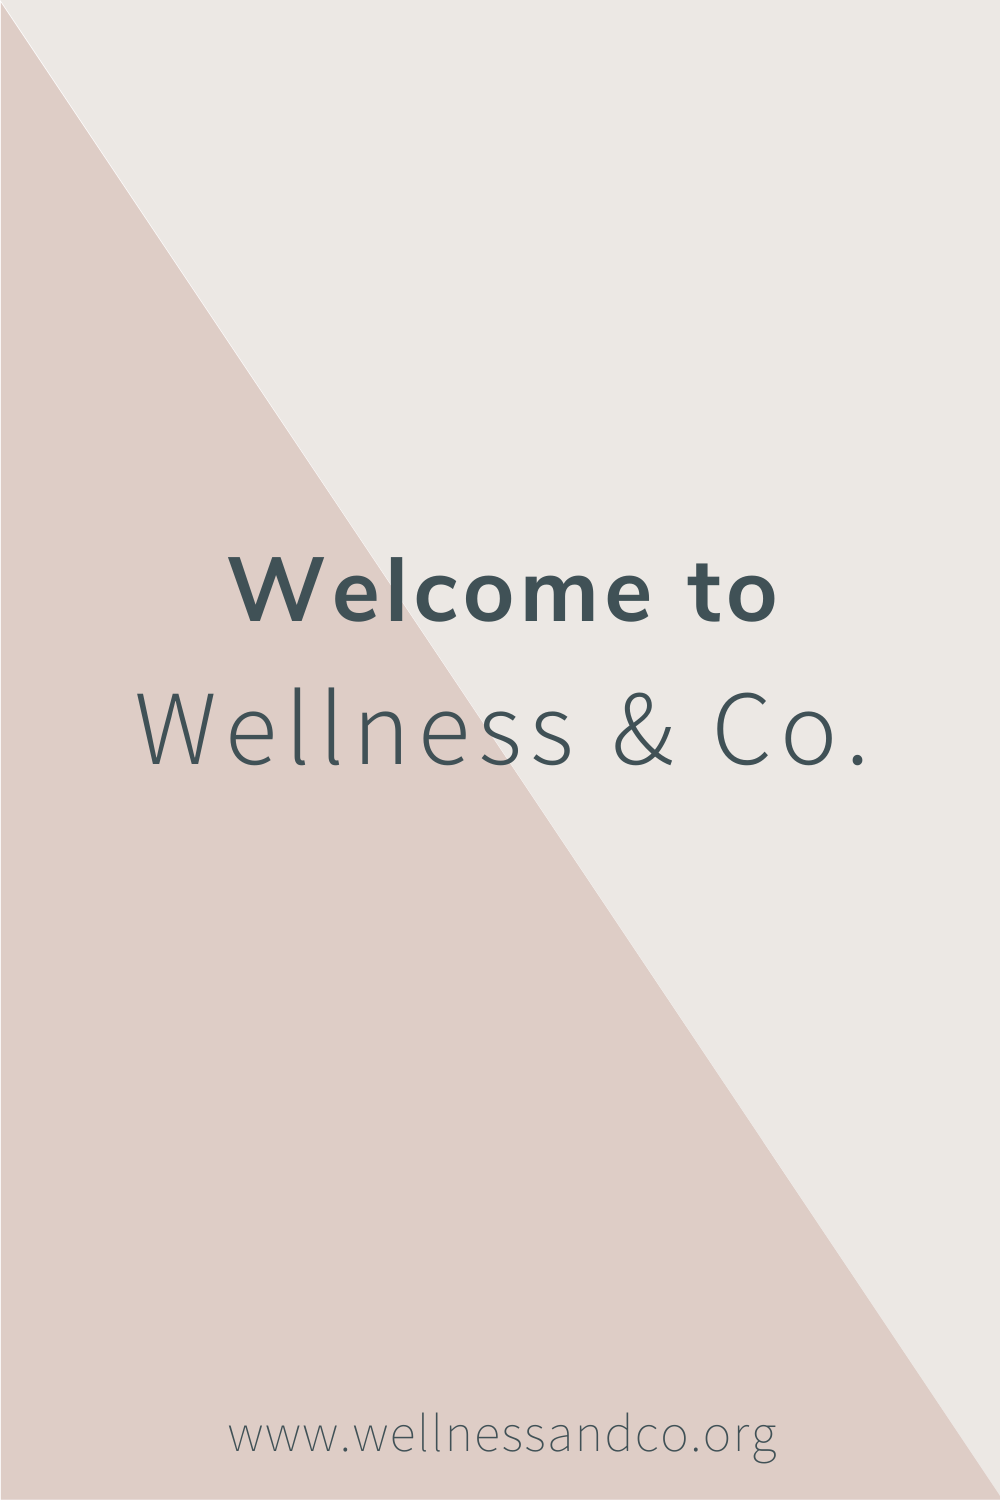 Welcome to Wellness & Co. | Hi there, thanks for stopping in! Our therapy practice has grown and rebranded and we are so grateful you are along for the ride! Check out our new brand, website, graphics, styles, fonts, and more! We're proud of the new beginning and hope you are, too! Cheers!